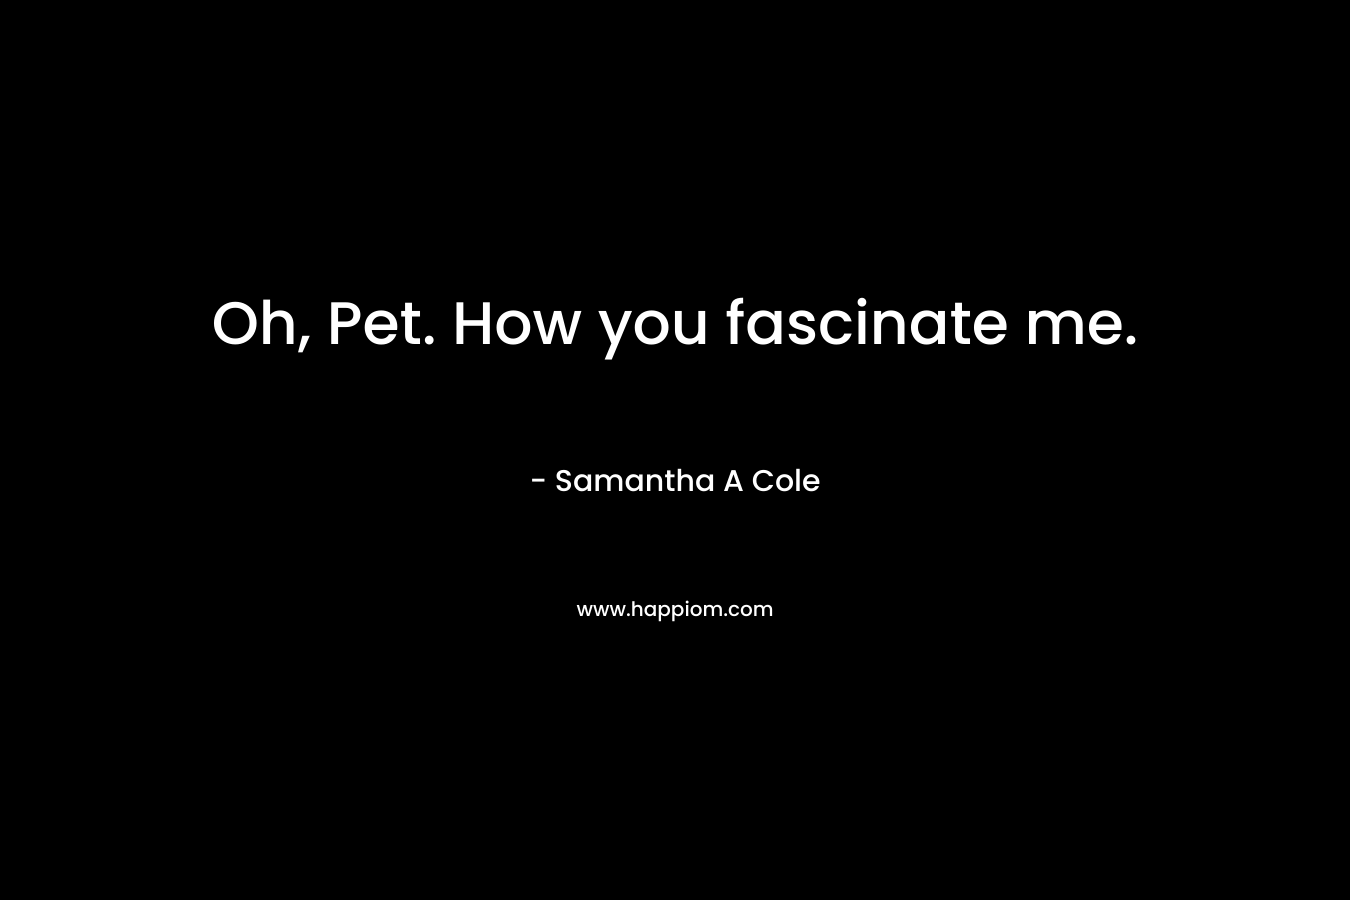 Oh, Pet. How you fascinate me. – Samantha A Cole